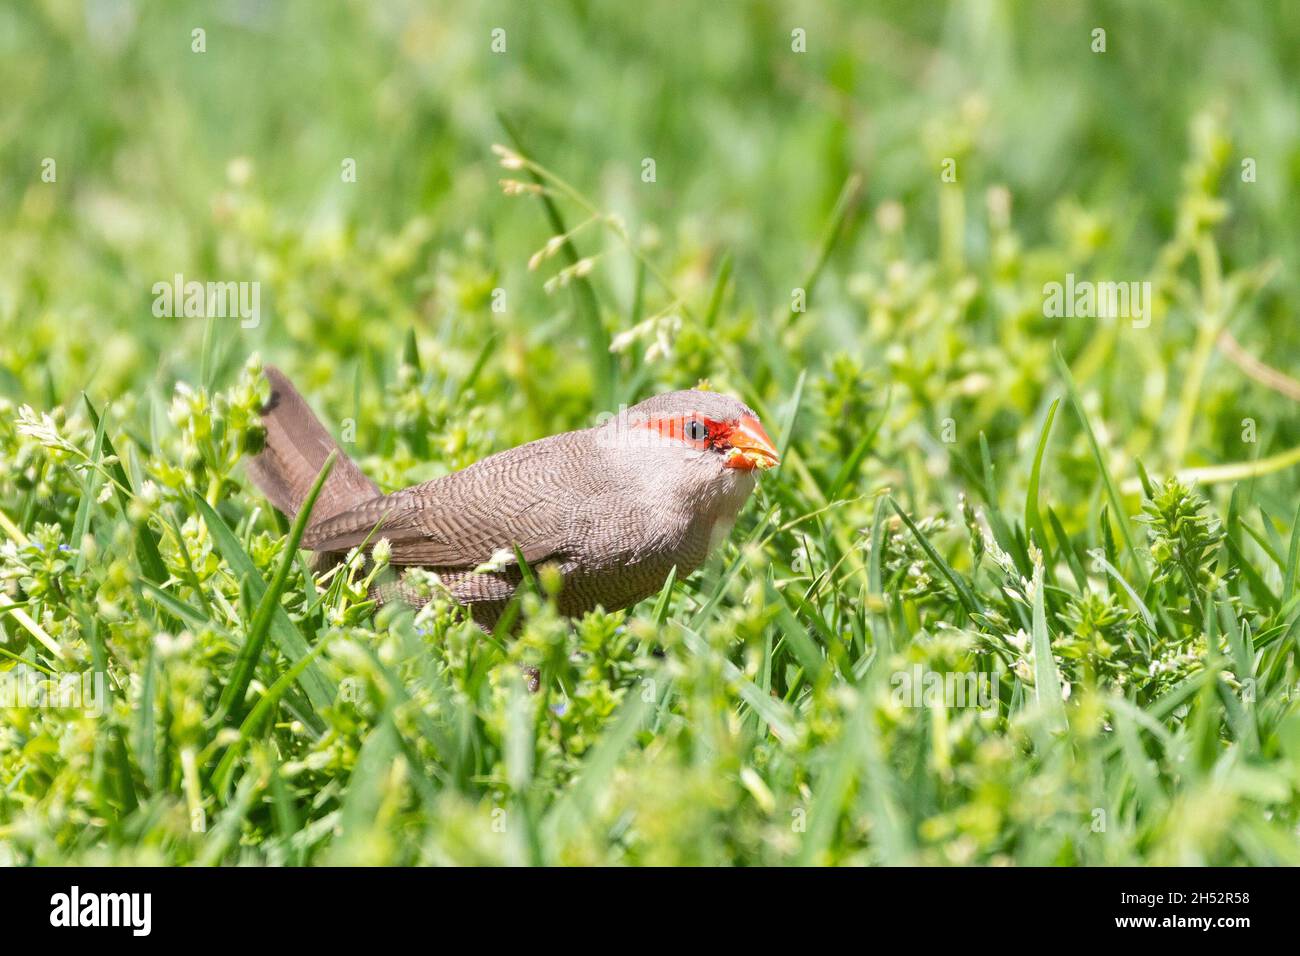 Common Waxbill or St Helena Waxbill (Estrilda astrild) a small estrildid finch foraging for seeds on grass in spring, Western Cape, South Africa Stock Photo